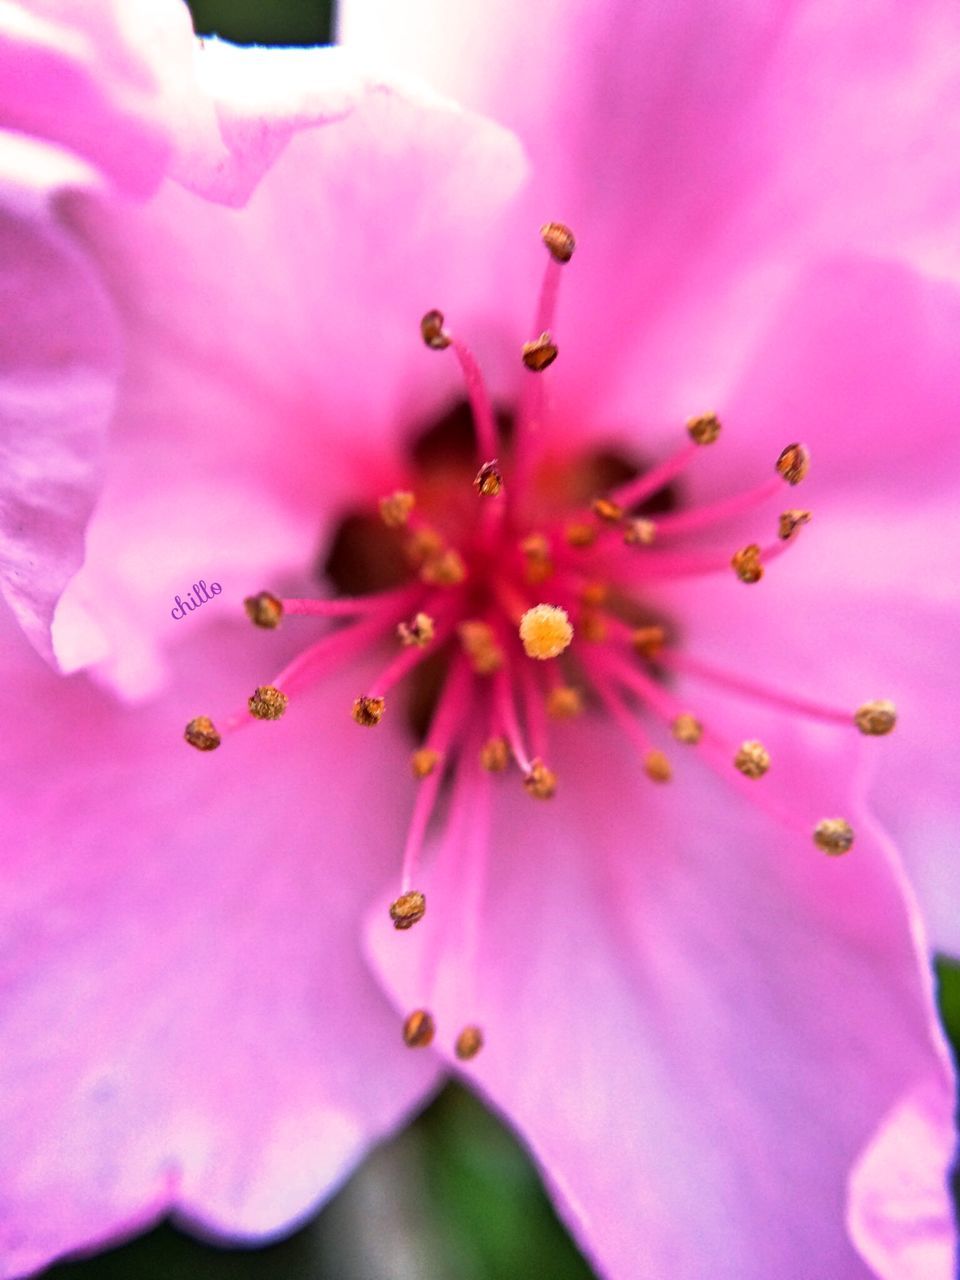 flower, petal, freshness, fragility, flower head, pink color, growth, beauty in nature, close-up, stamen, nature, pollen, pink, blooming, selective focus, single flower, macro, blossom, in bloom, focus on foreground